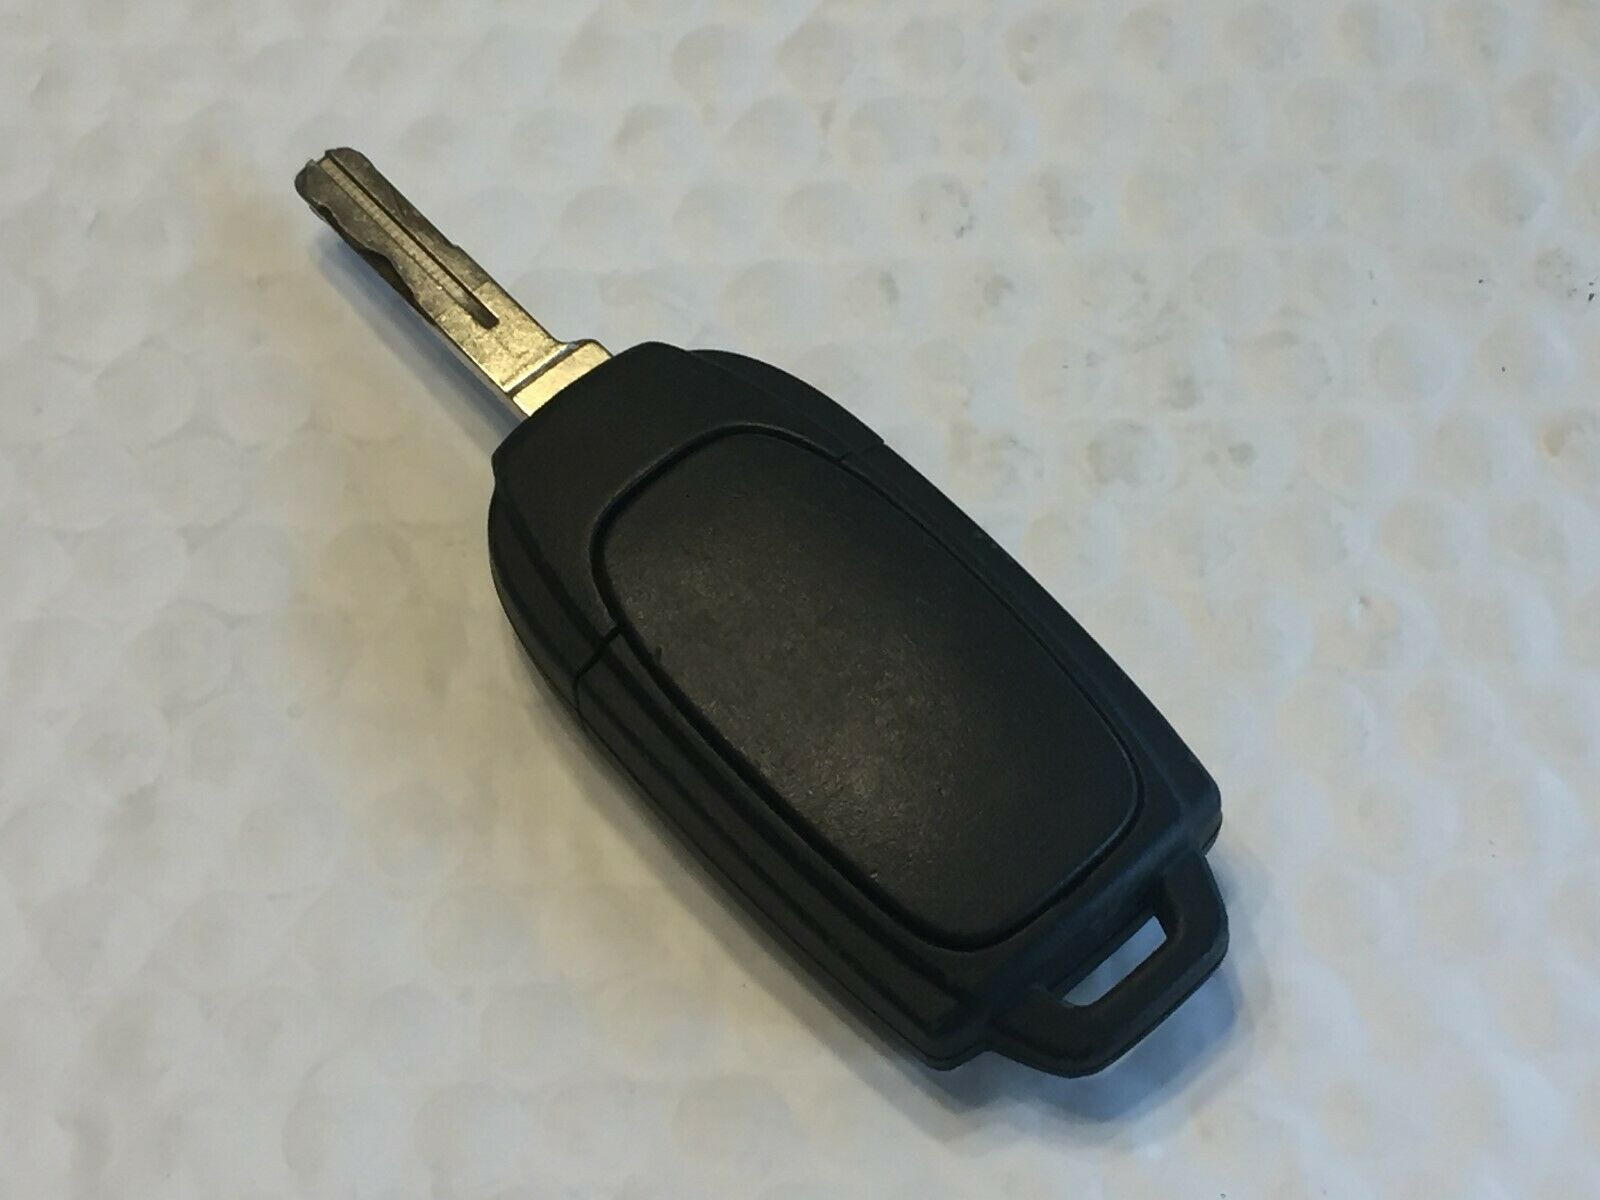 2004-2014 Volvo Xc90 Keyless Entry Remote Fob Lqnp2t-Apu 5 Buttons - Oemusedautoparts1.com